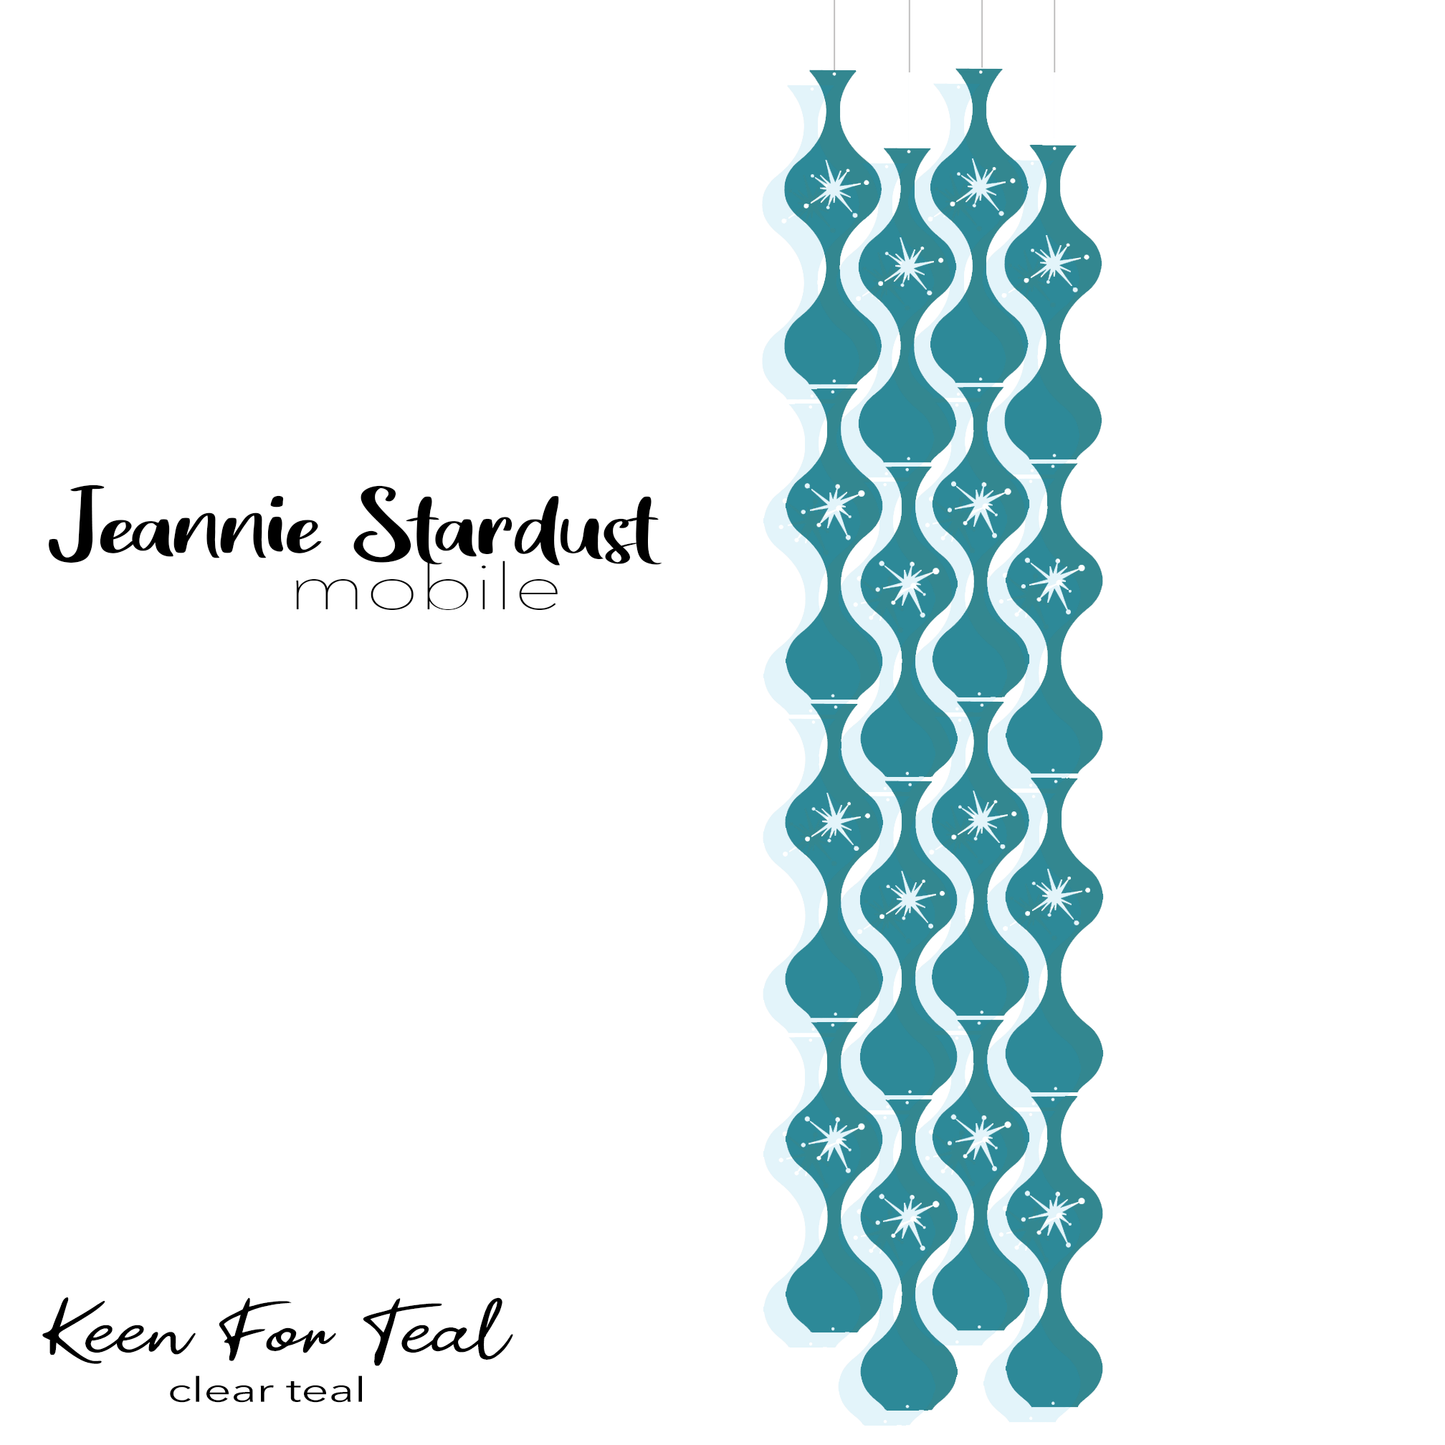  Jeannie Stardust Keen For Teal  - Clear teal blue plexiglass acrylic hanging art mobiles in mid century modern style for home decor by AtomicMobiles.com